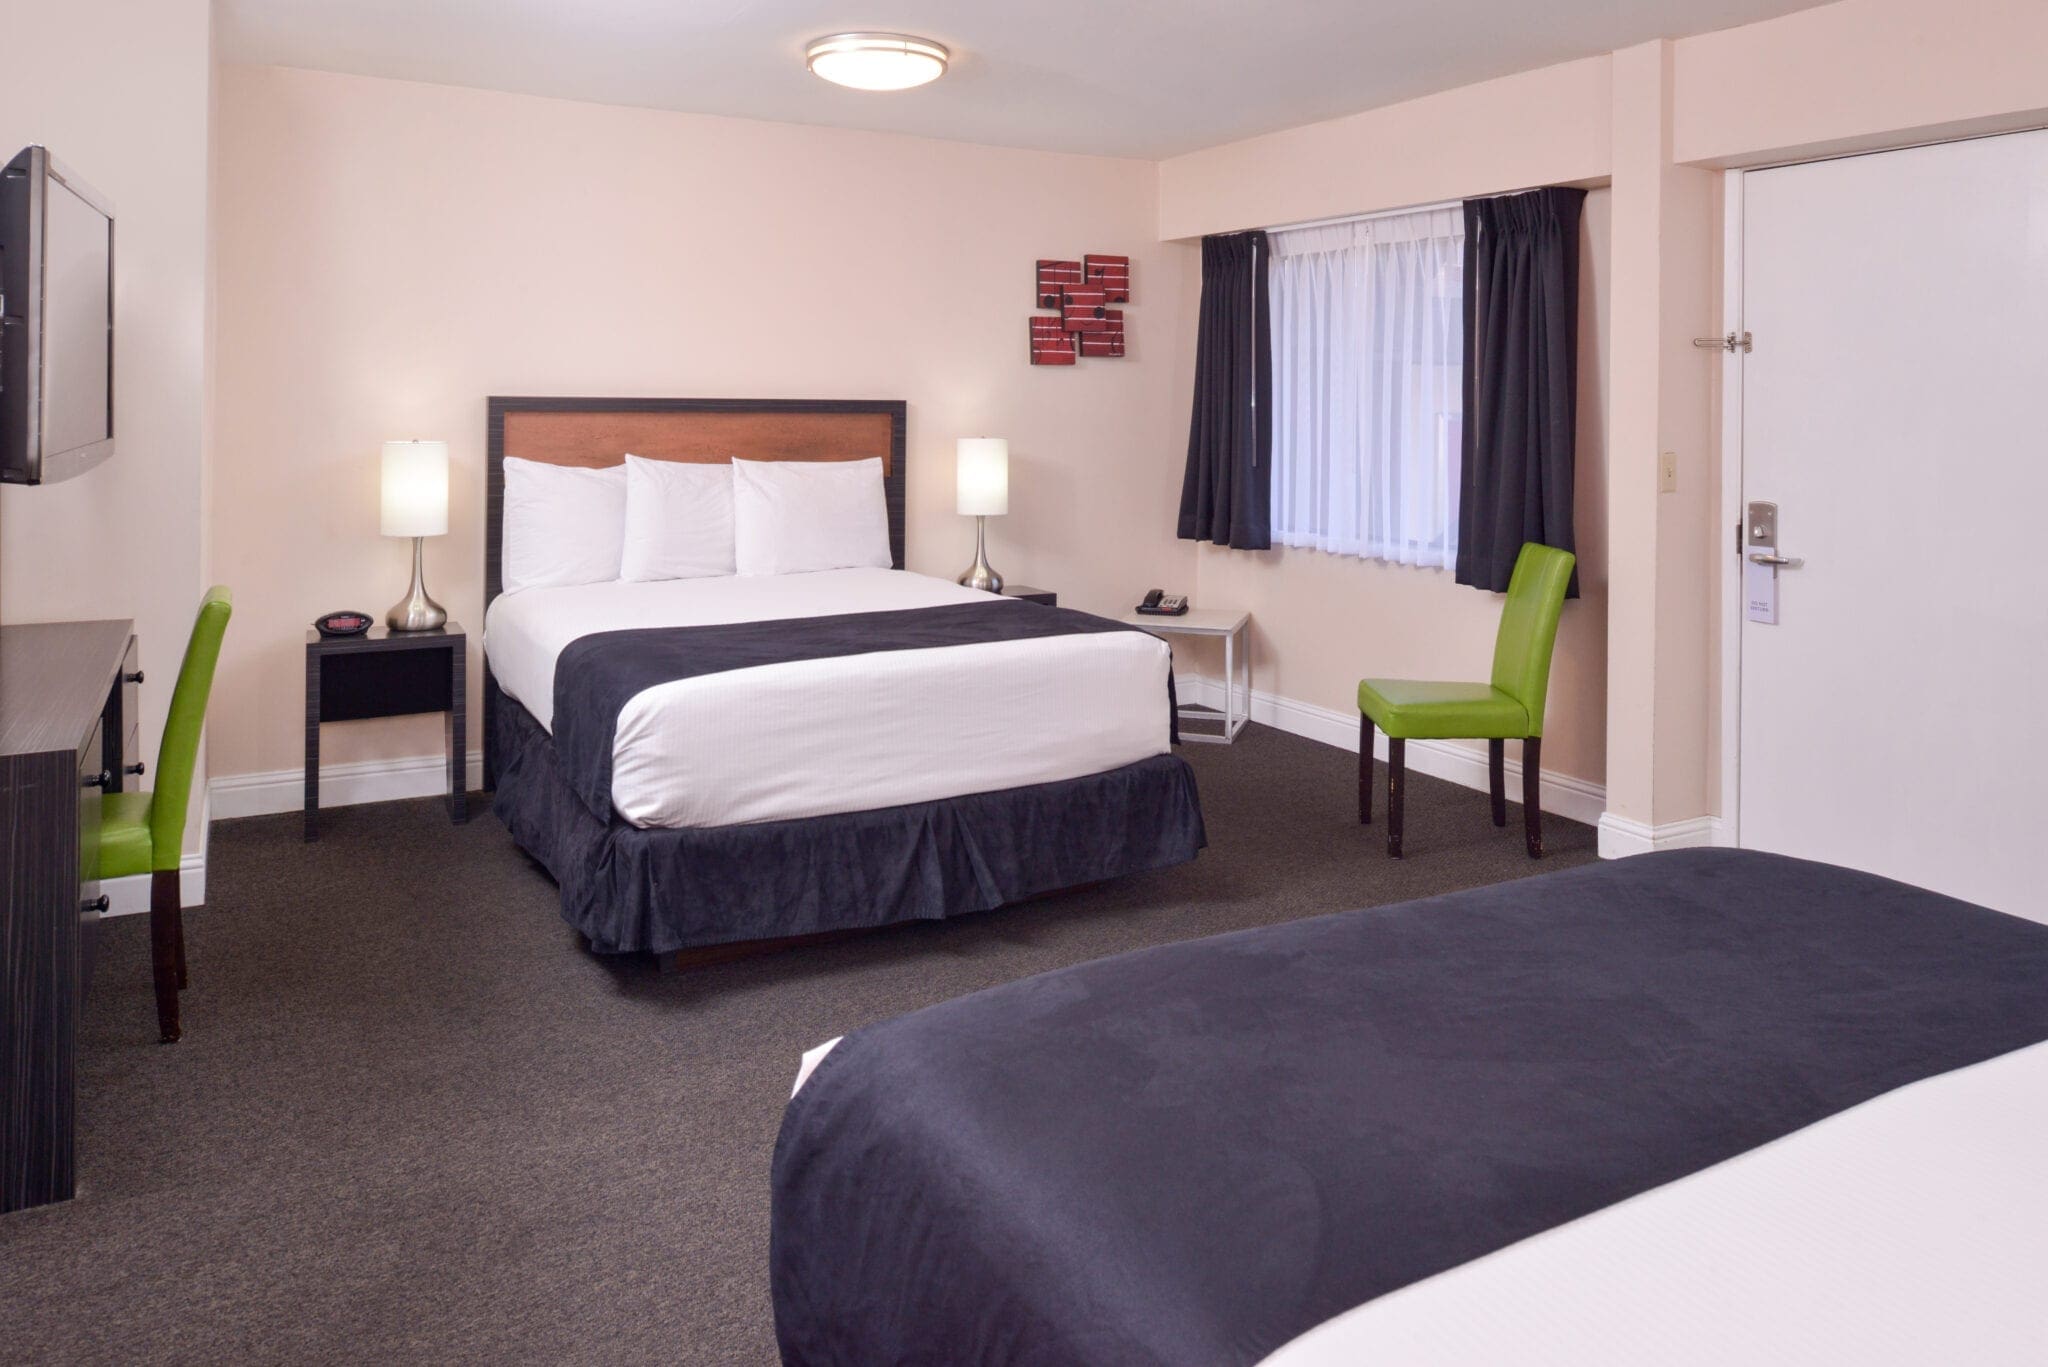 Premium double queen with two beds at Hotel Ruby Spokane.